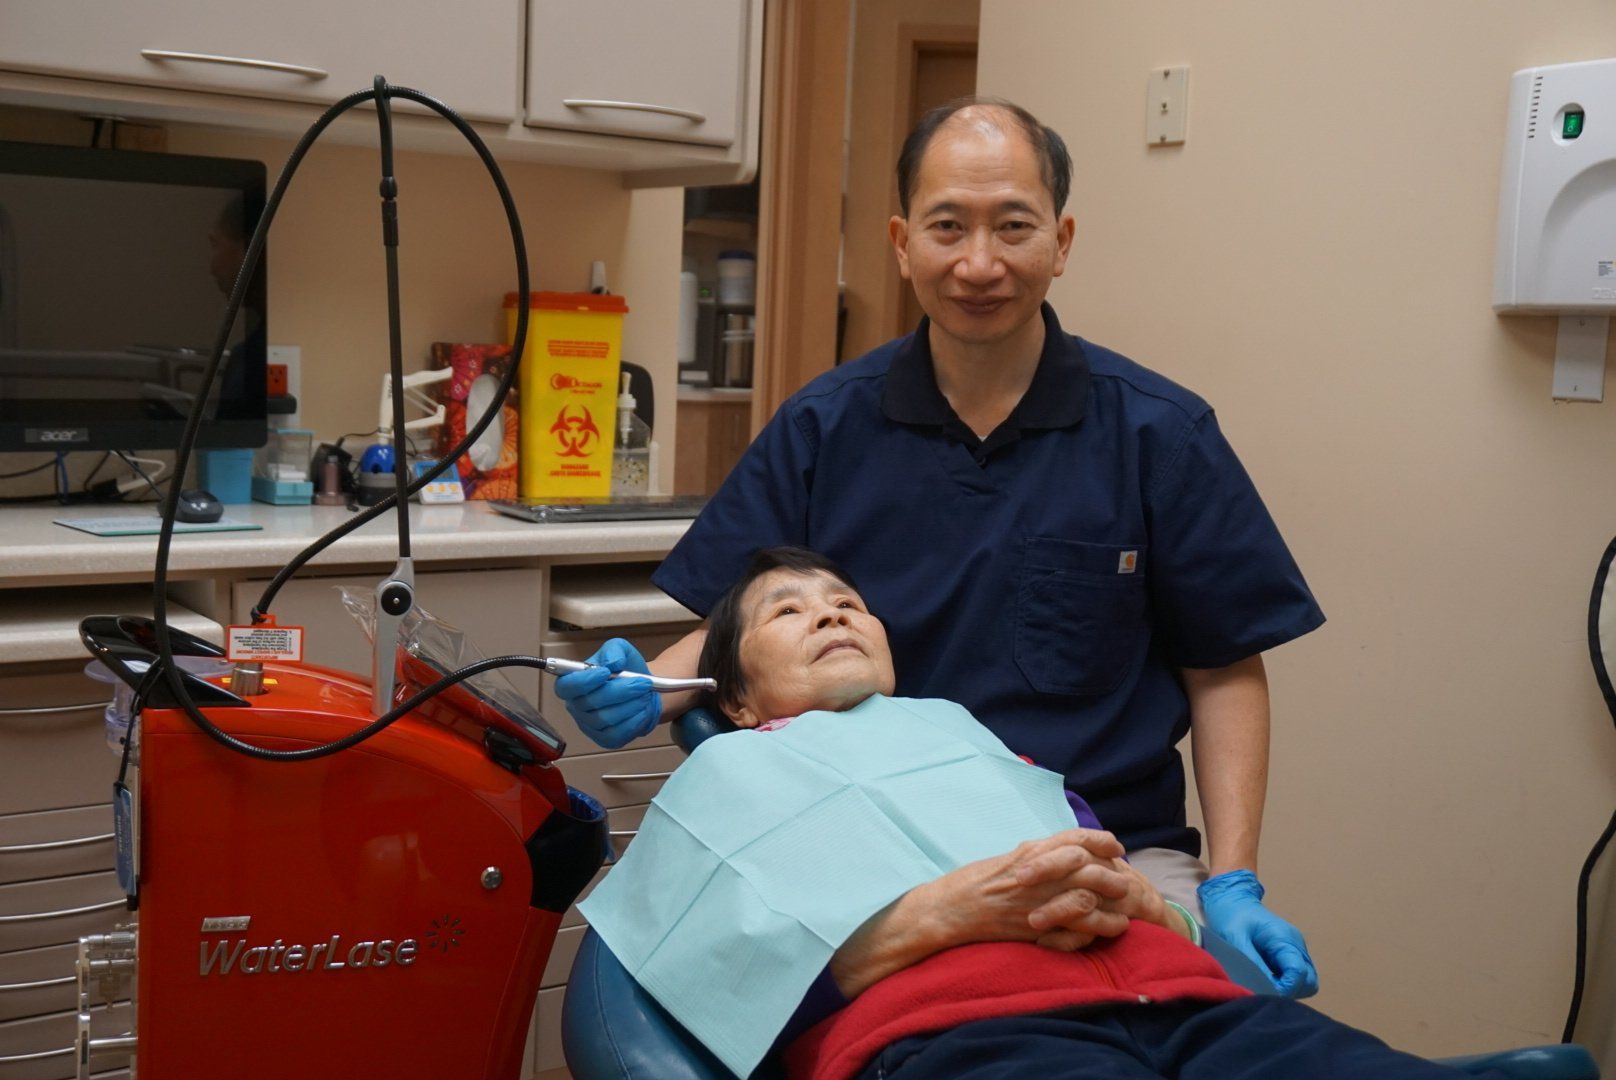 Dr. Kin performing laser therapy on a patient